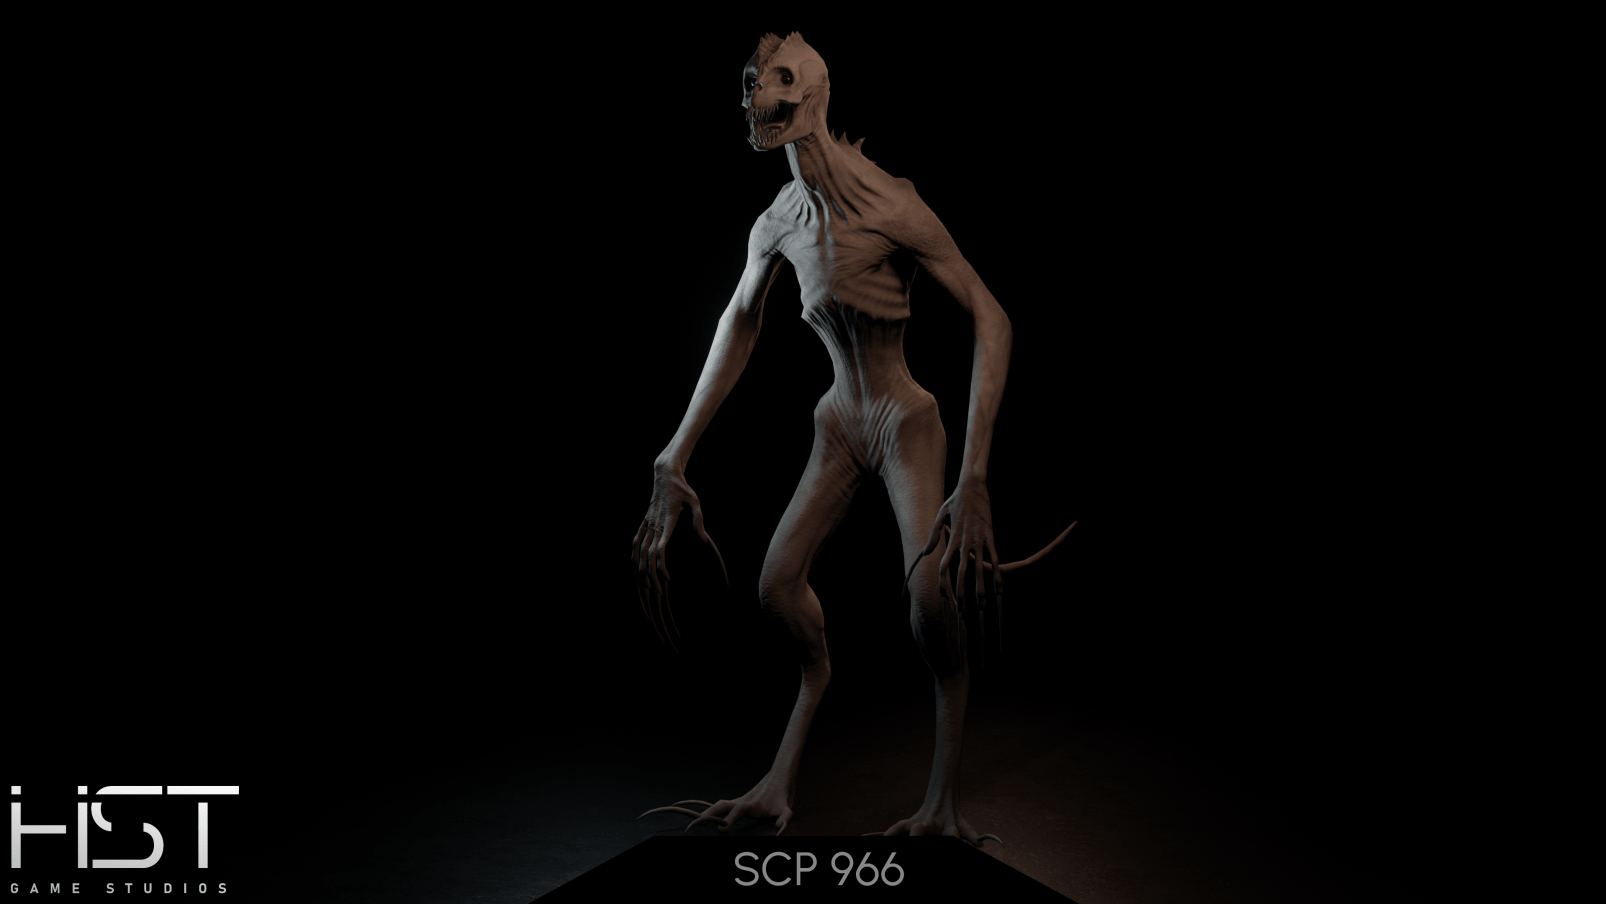 SCP: Fragmented Minds - SCP - 939 Rework - Steam News